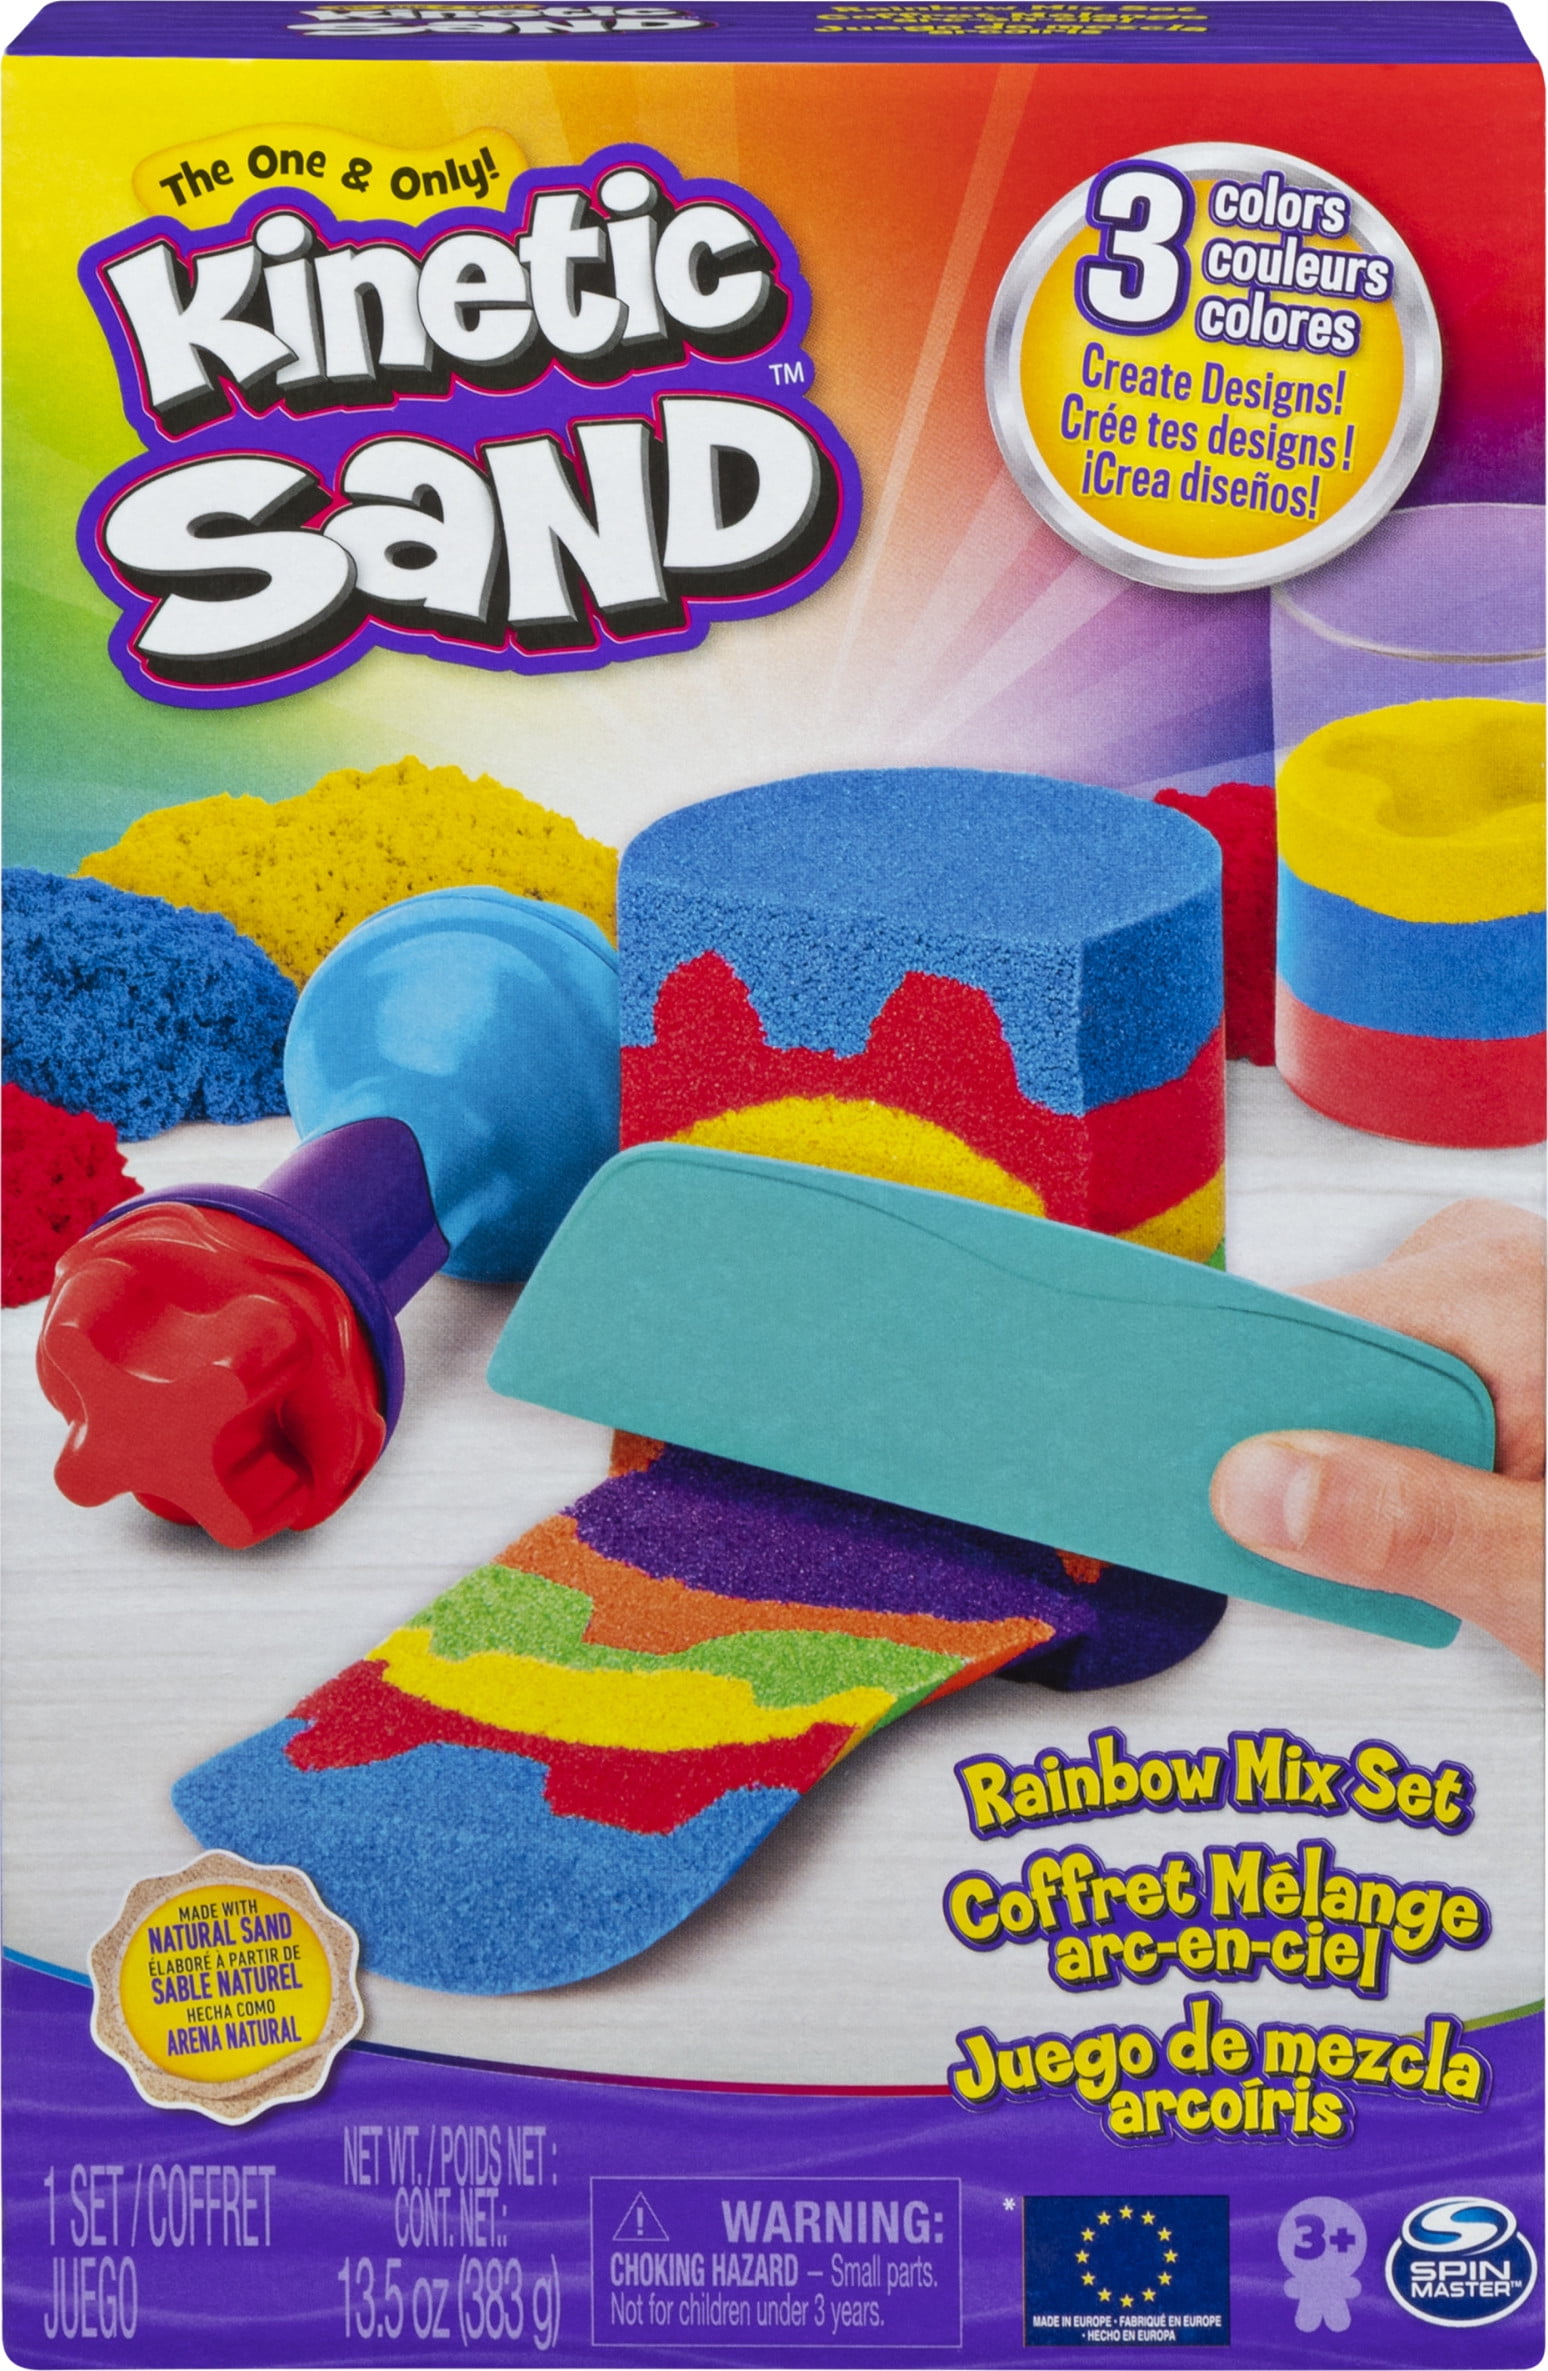 Magic Sand Motion Moving Crazy Play Artistic Modelling Gift Building Formula 3 